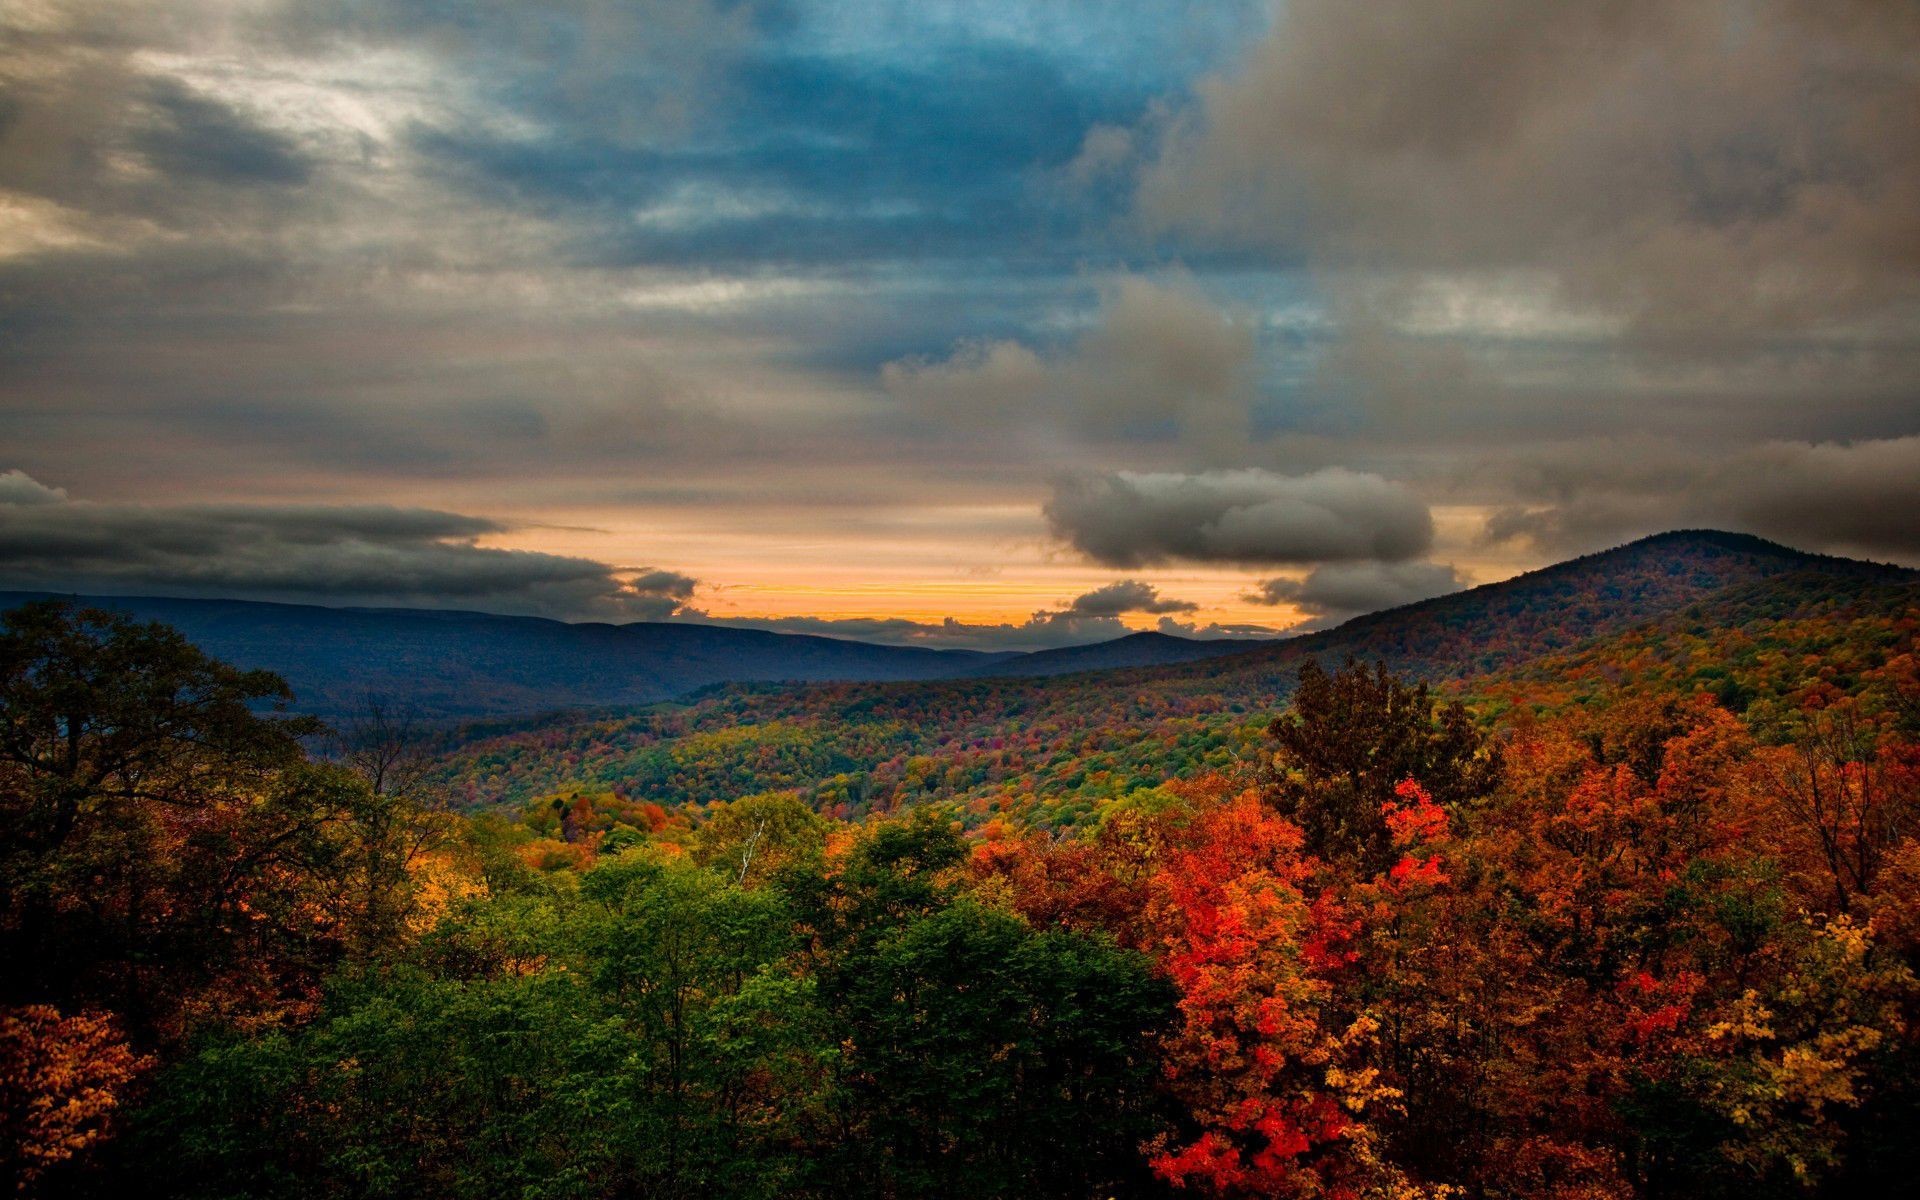 The Most Scenic Road Trips in Virginia